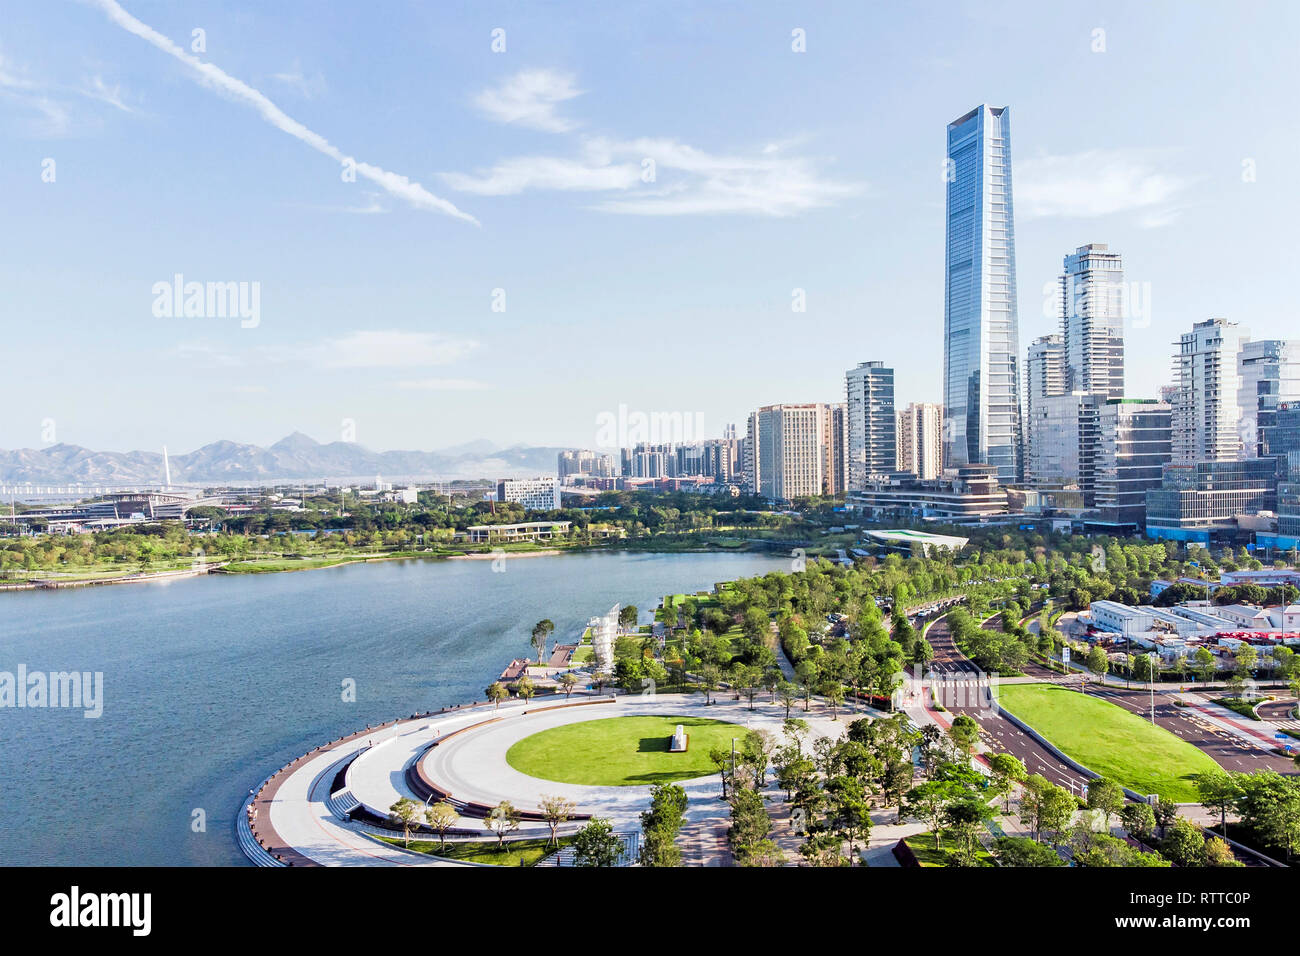 Skyline of Shenzhen Bay and Buildings. New Property Development and Urban Park. Stock Photo